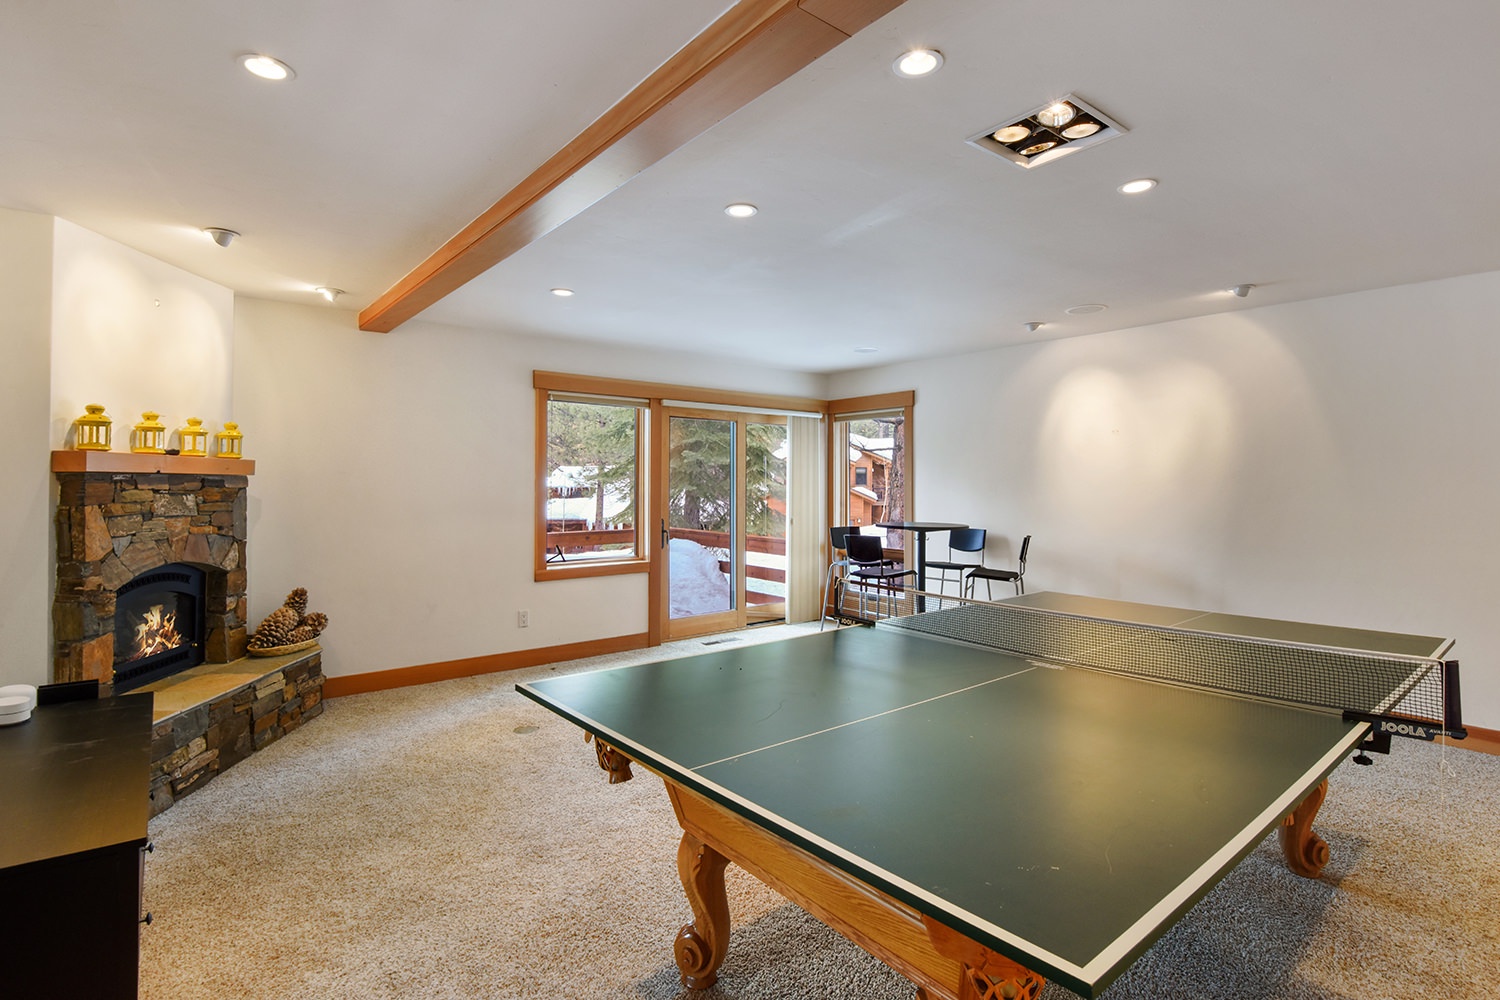 Game room with pool table, games, and fireplace (downstairs)